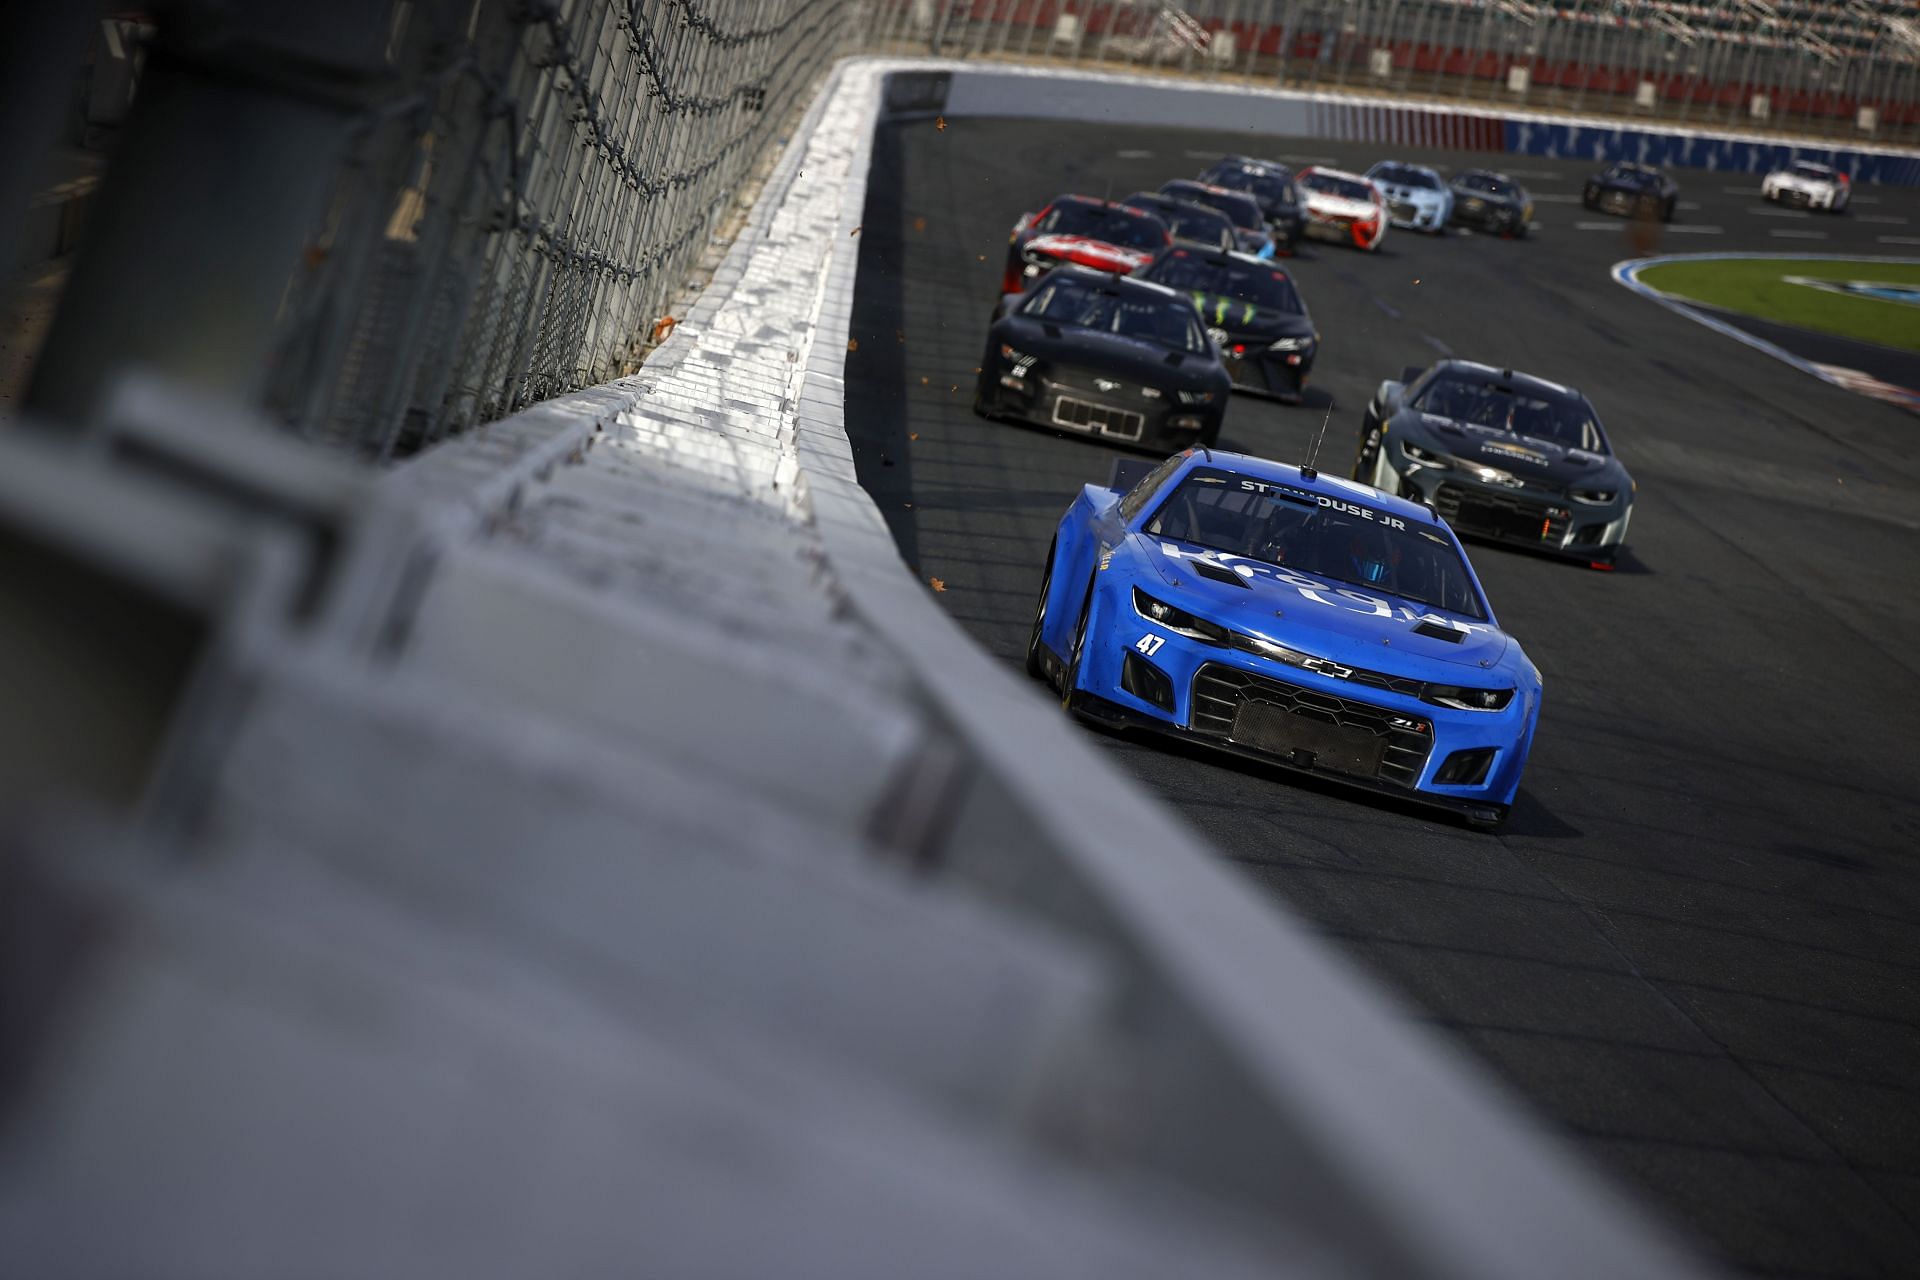 Ricky Stenhouse Jr., driver of the No. 47 JTG Daugherty Racing Chevrolet, leads a pack of cars during the NASCAR Next Gen Test at Charlotte Motor Speedway. (Photo by Jared C. Tilton/Getty Images)